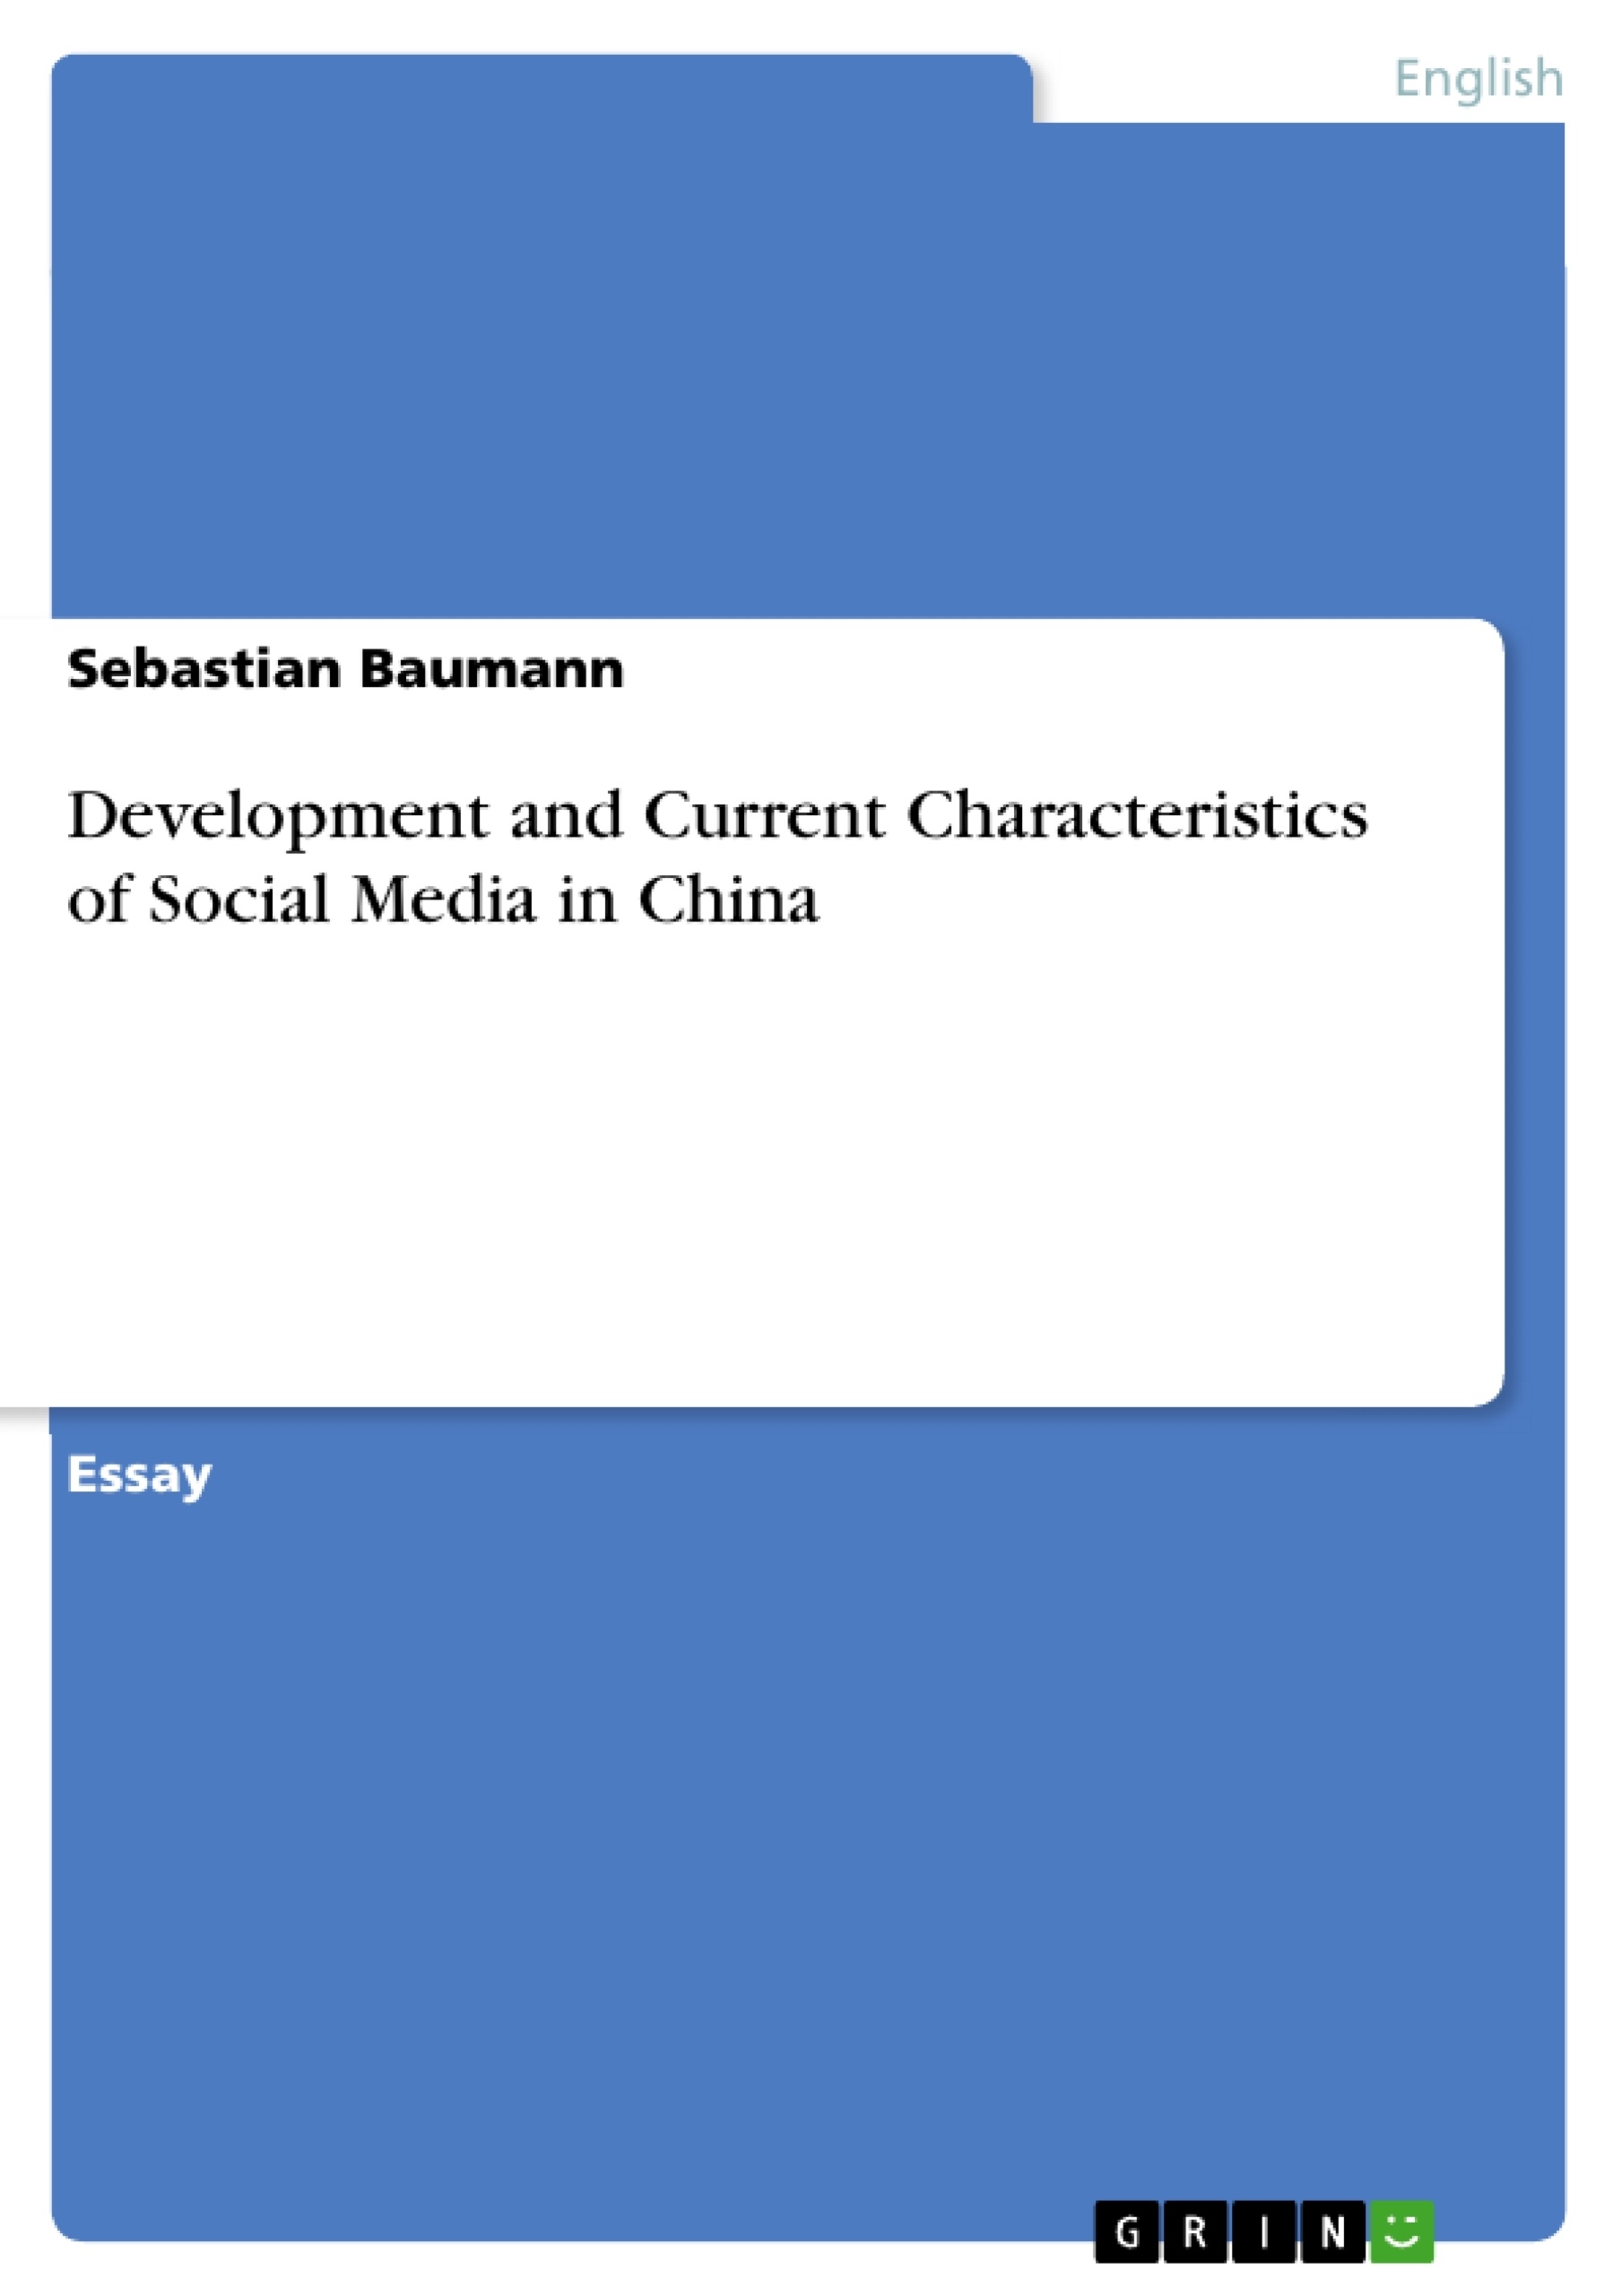 Title: Development and Current Characteristics of Social Media in China